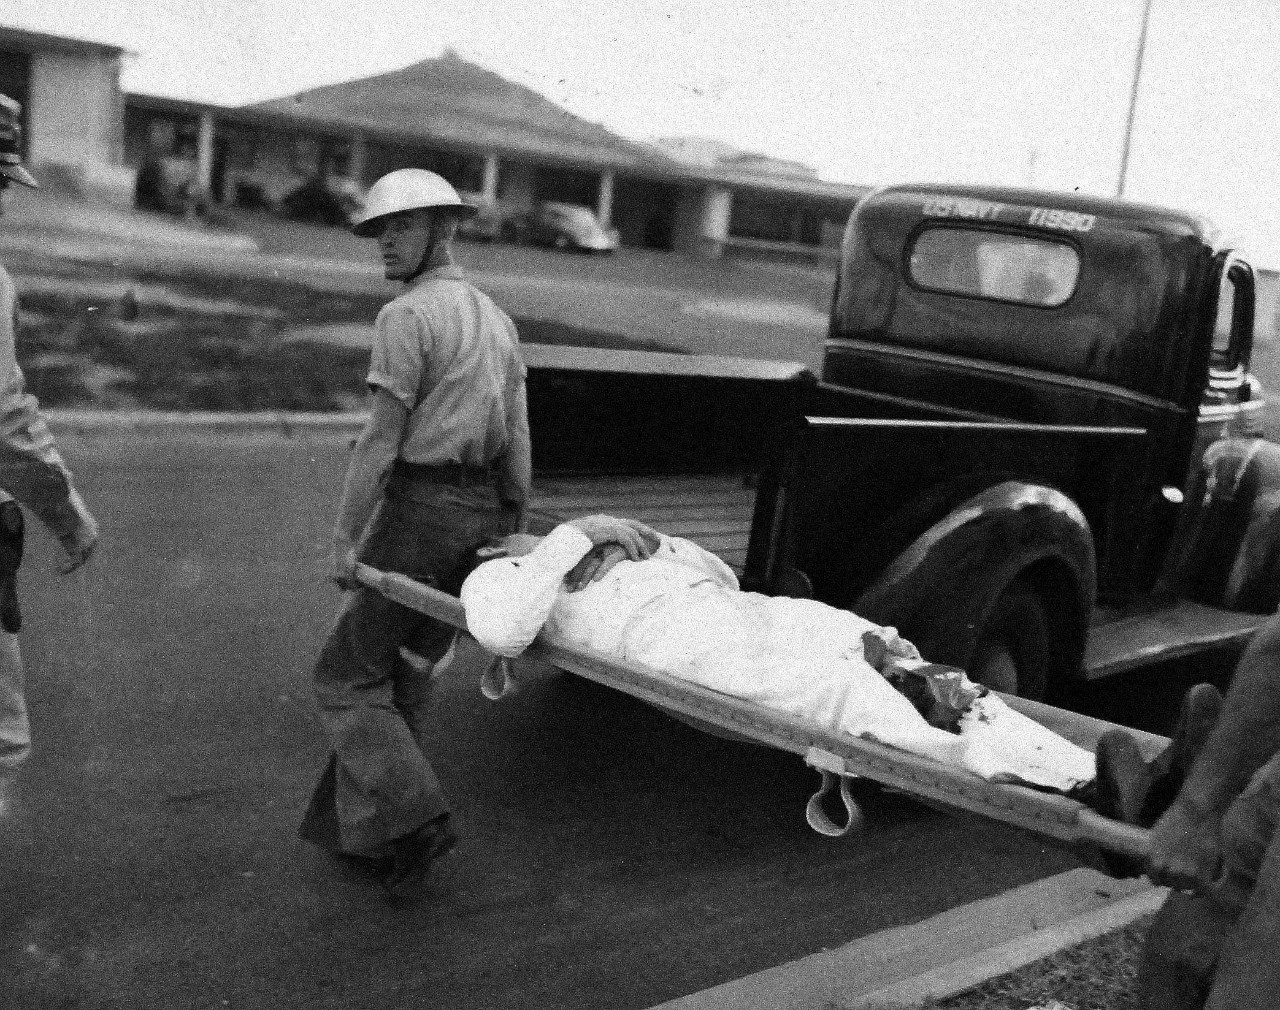 <p>80-G-77625: Japanese Attack on Pearl Harbor Attack, 7 December 1941 U.S. Navy sailor injured during Japanese Attack on Pearl Harbor, Territory of Hawaii, being carried to safet. Location: Naval Air Station, Kaneohe Bay, Oahu.&nbsp;</p>
